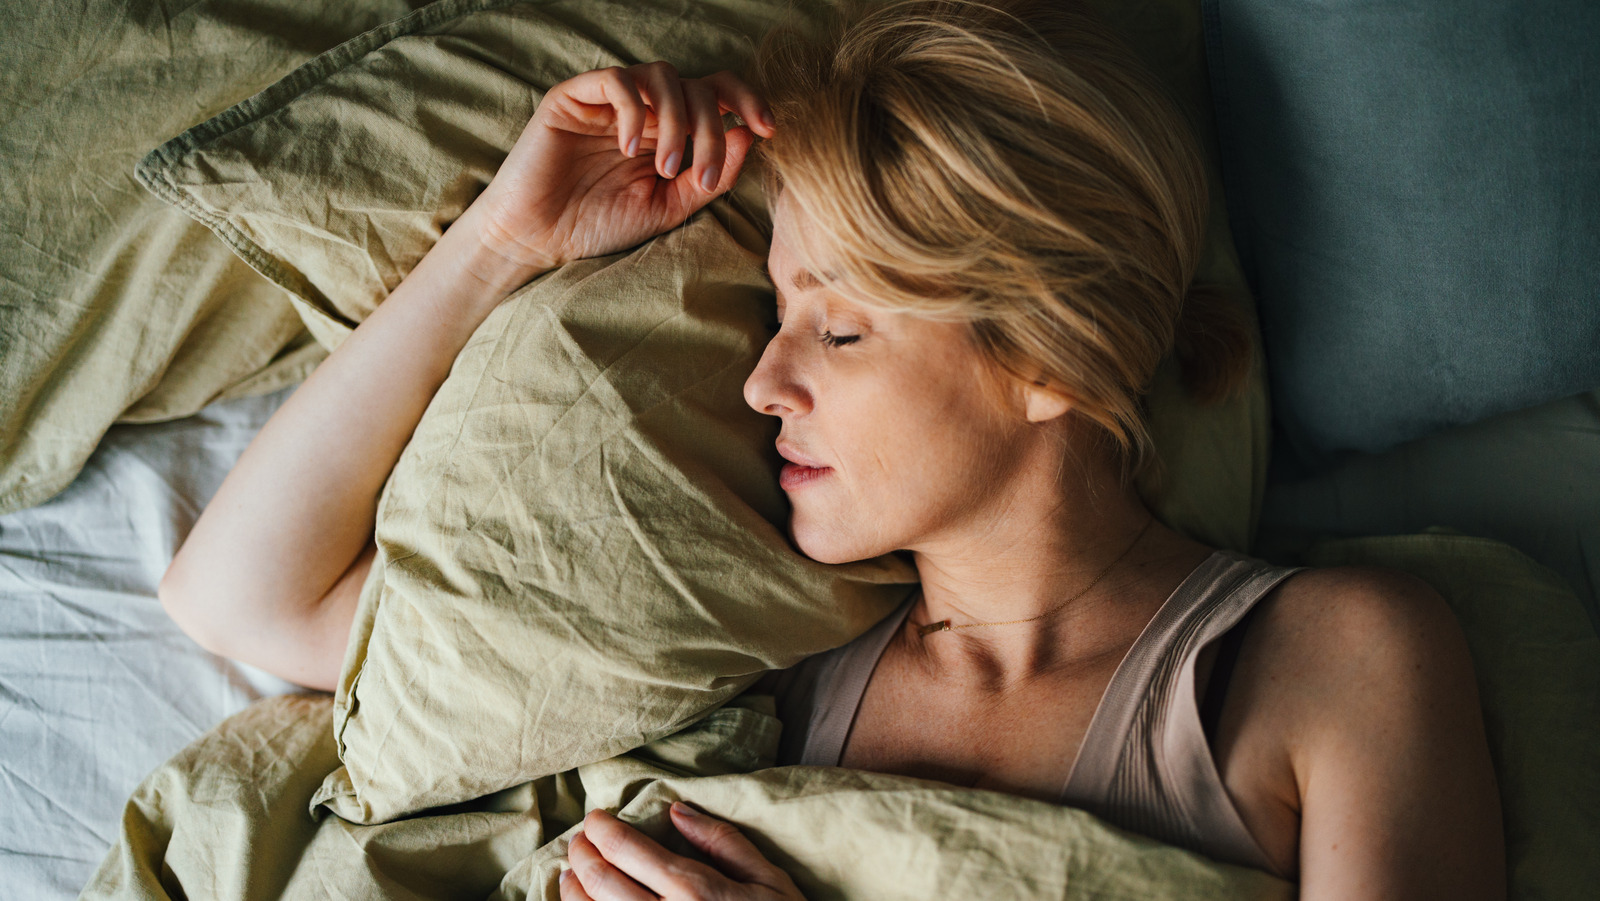 Do This With Your Eyes Every Night To Fall Asleep Quicker - Health Digest